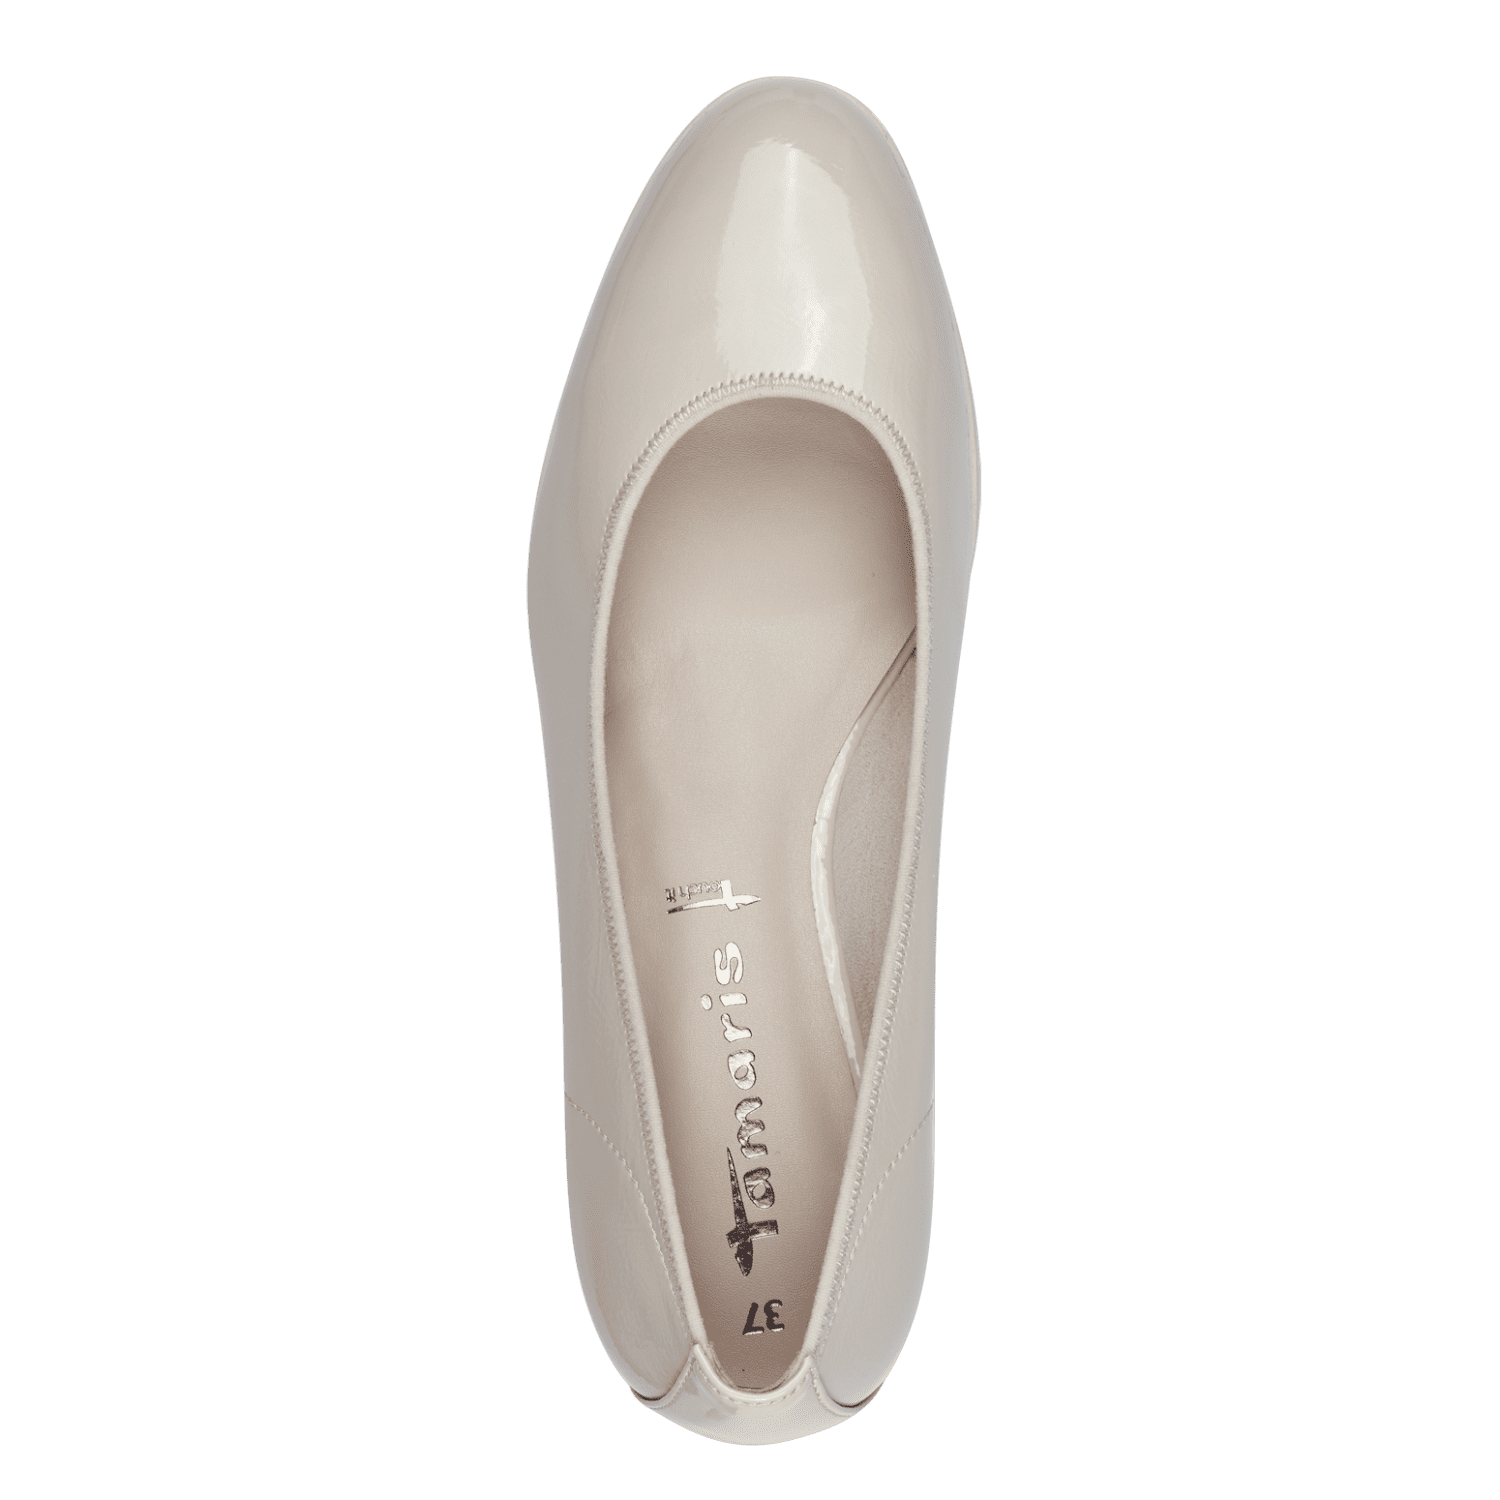  Top view of Tamaris espadrille, showing the comfortable insole and rounded toe design.